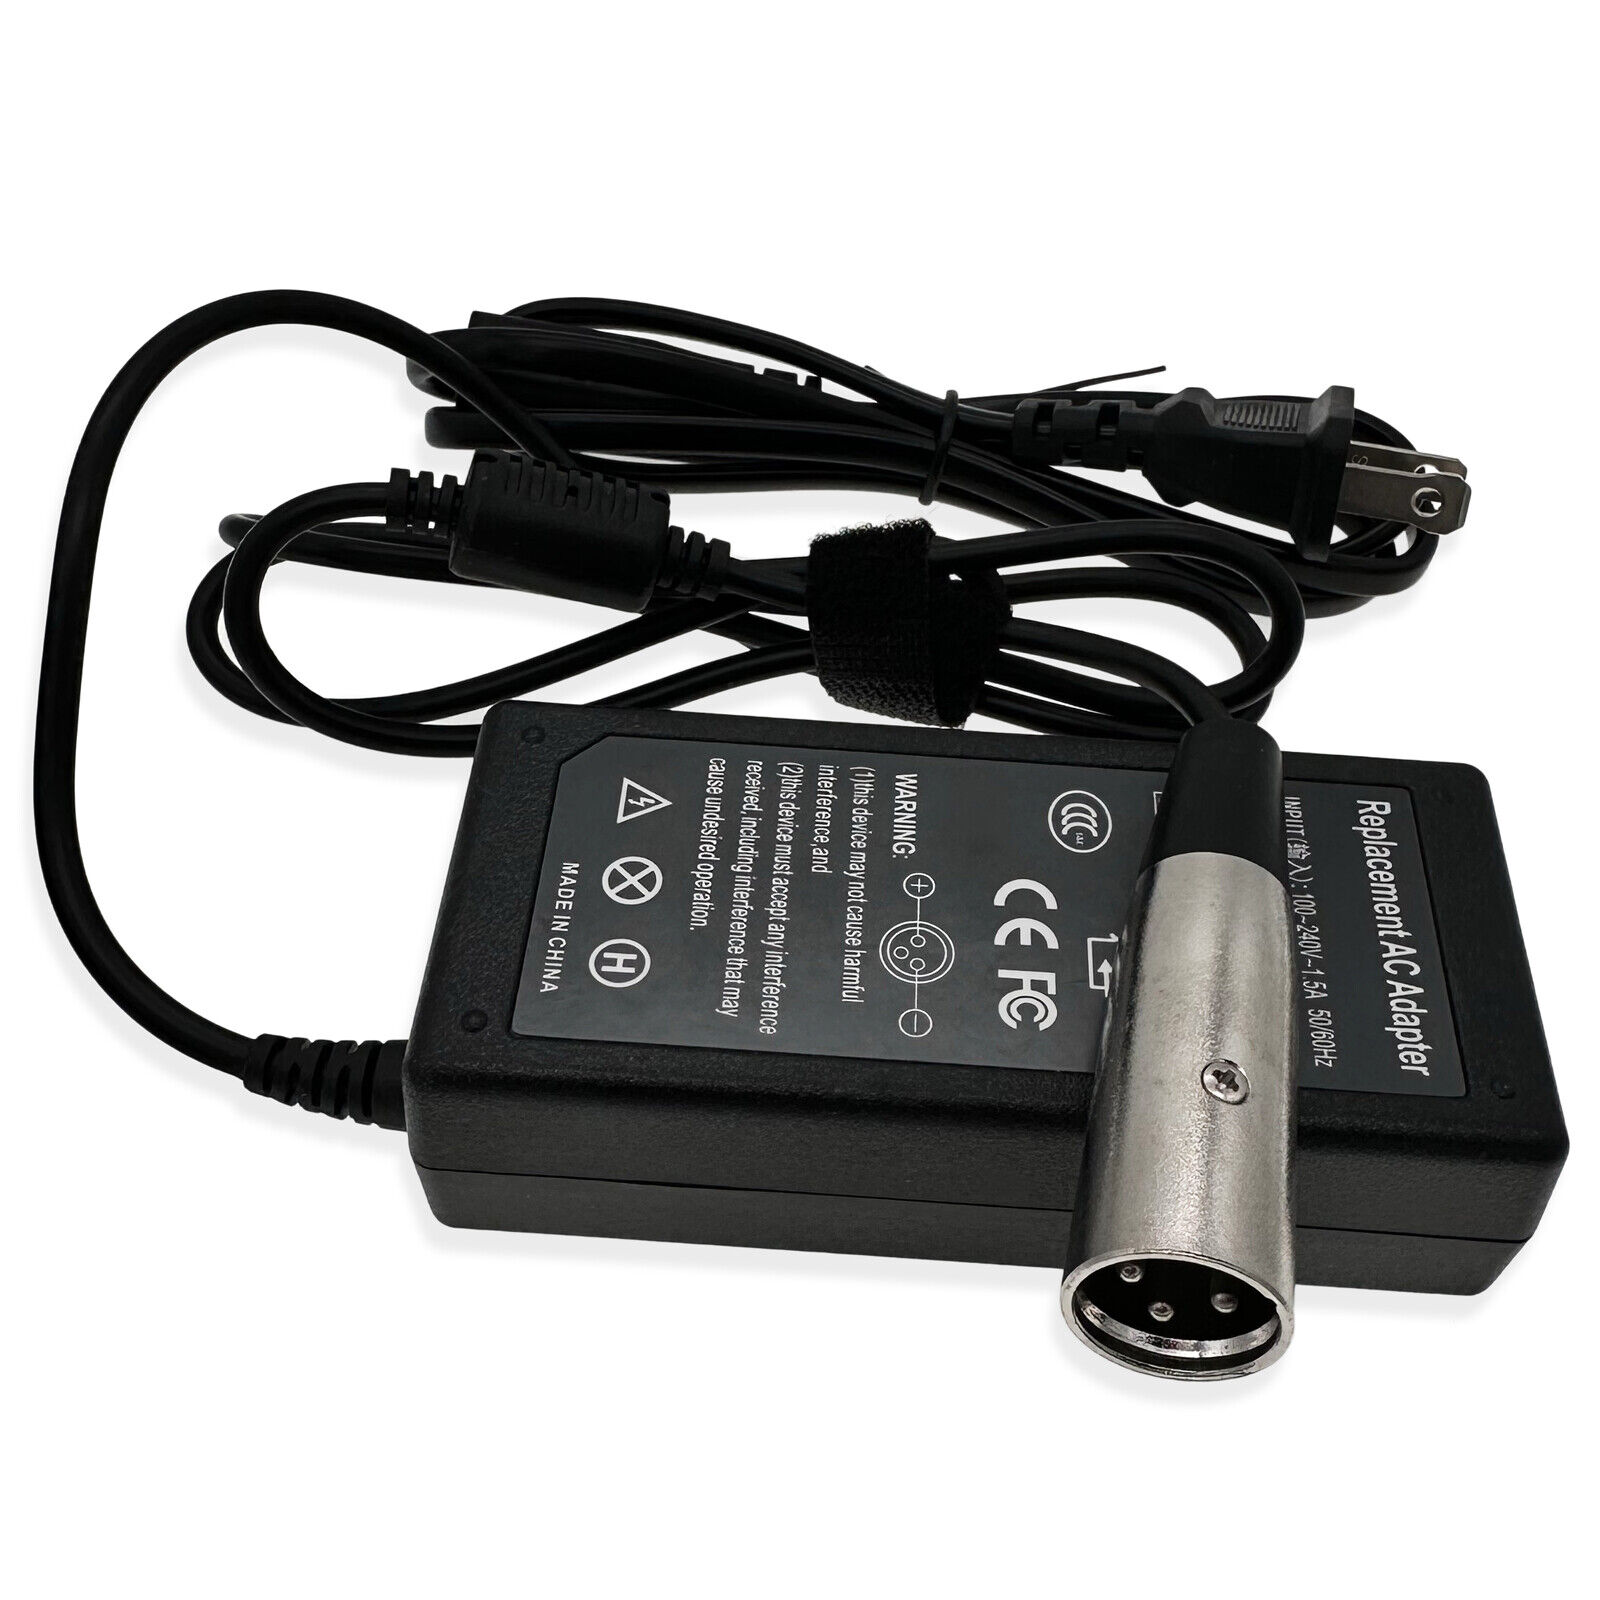 24V 2A 48W New Electric Scooter Power Chair Battery Charger for Amigo MC MCX US 24V 2A 48W New Electric Scooter Power C